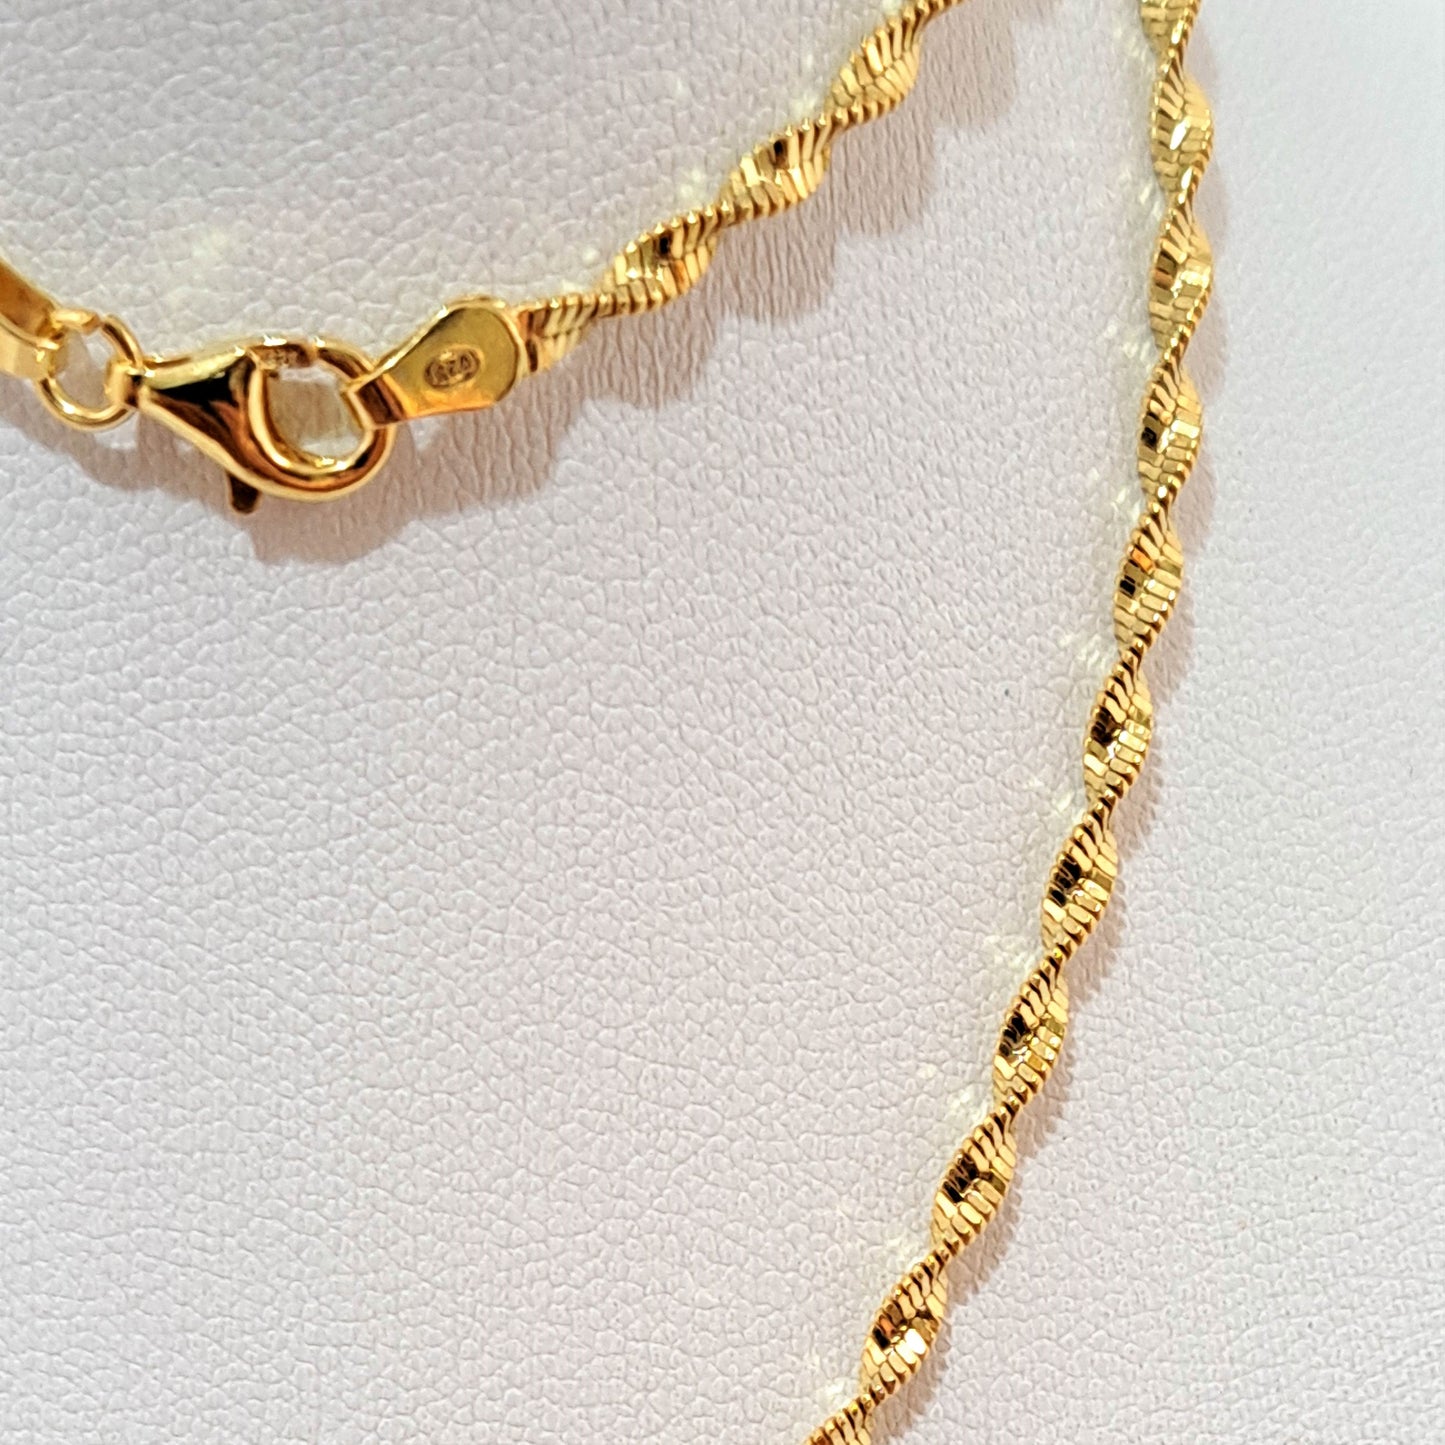 Gold plated sterling silver chain -B